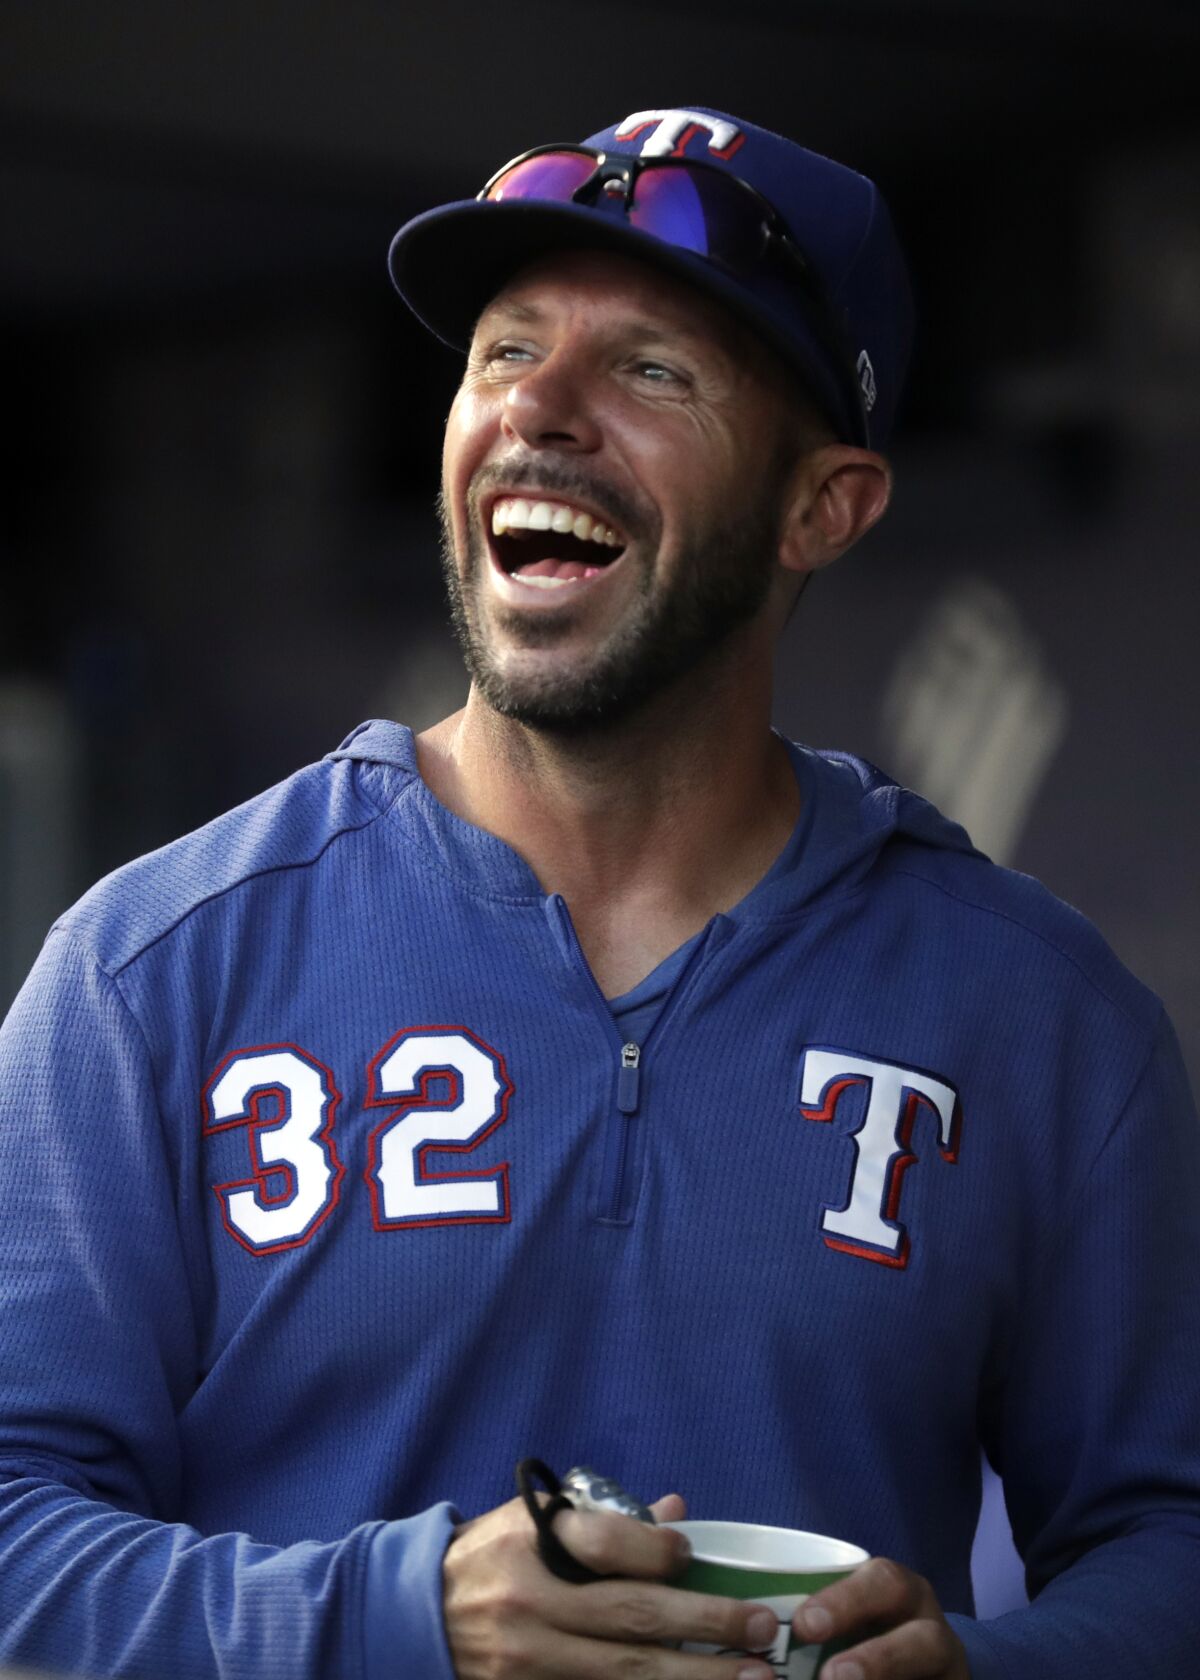 Texas Rangers coach Jayce Tingler has been hired to manage the Padres.